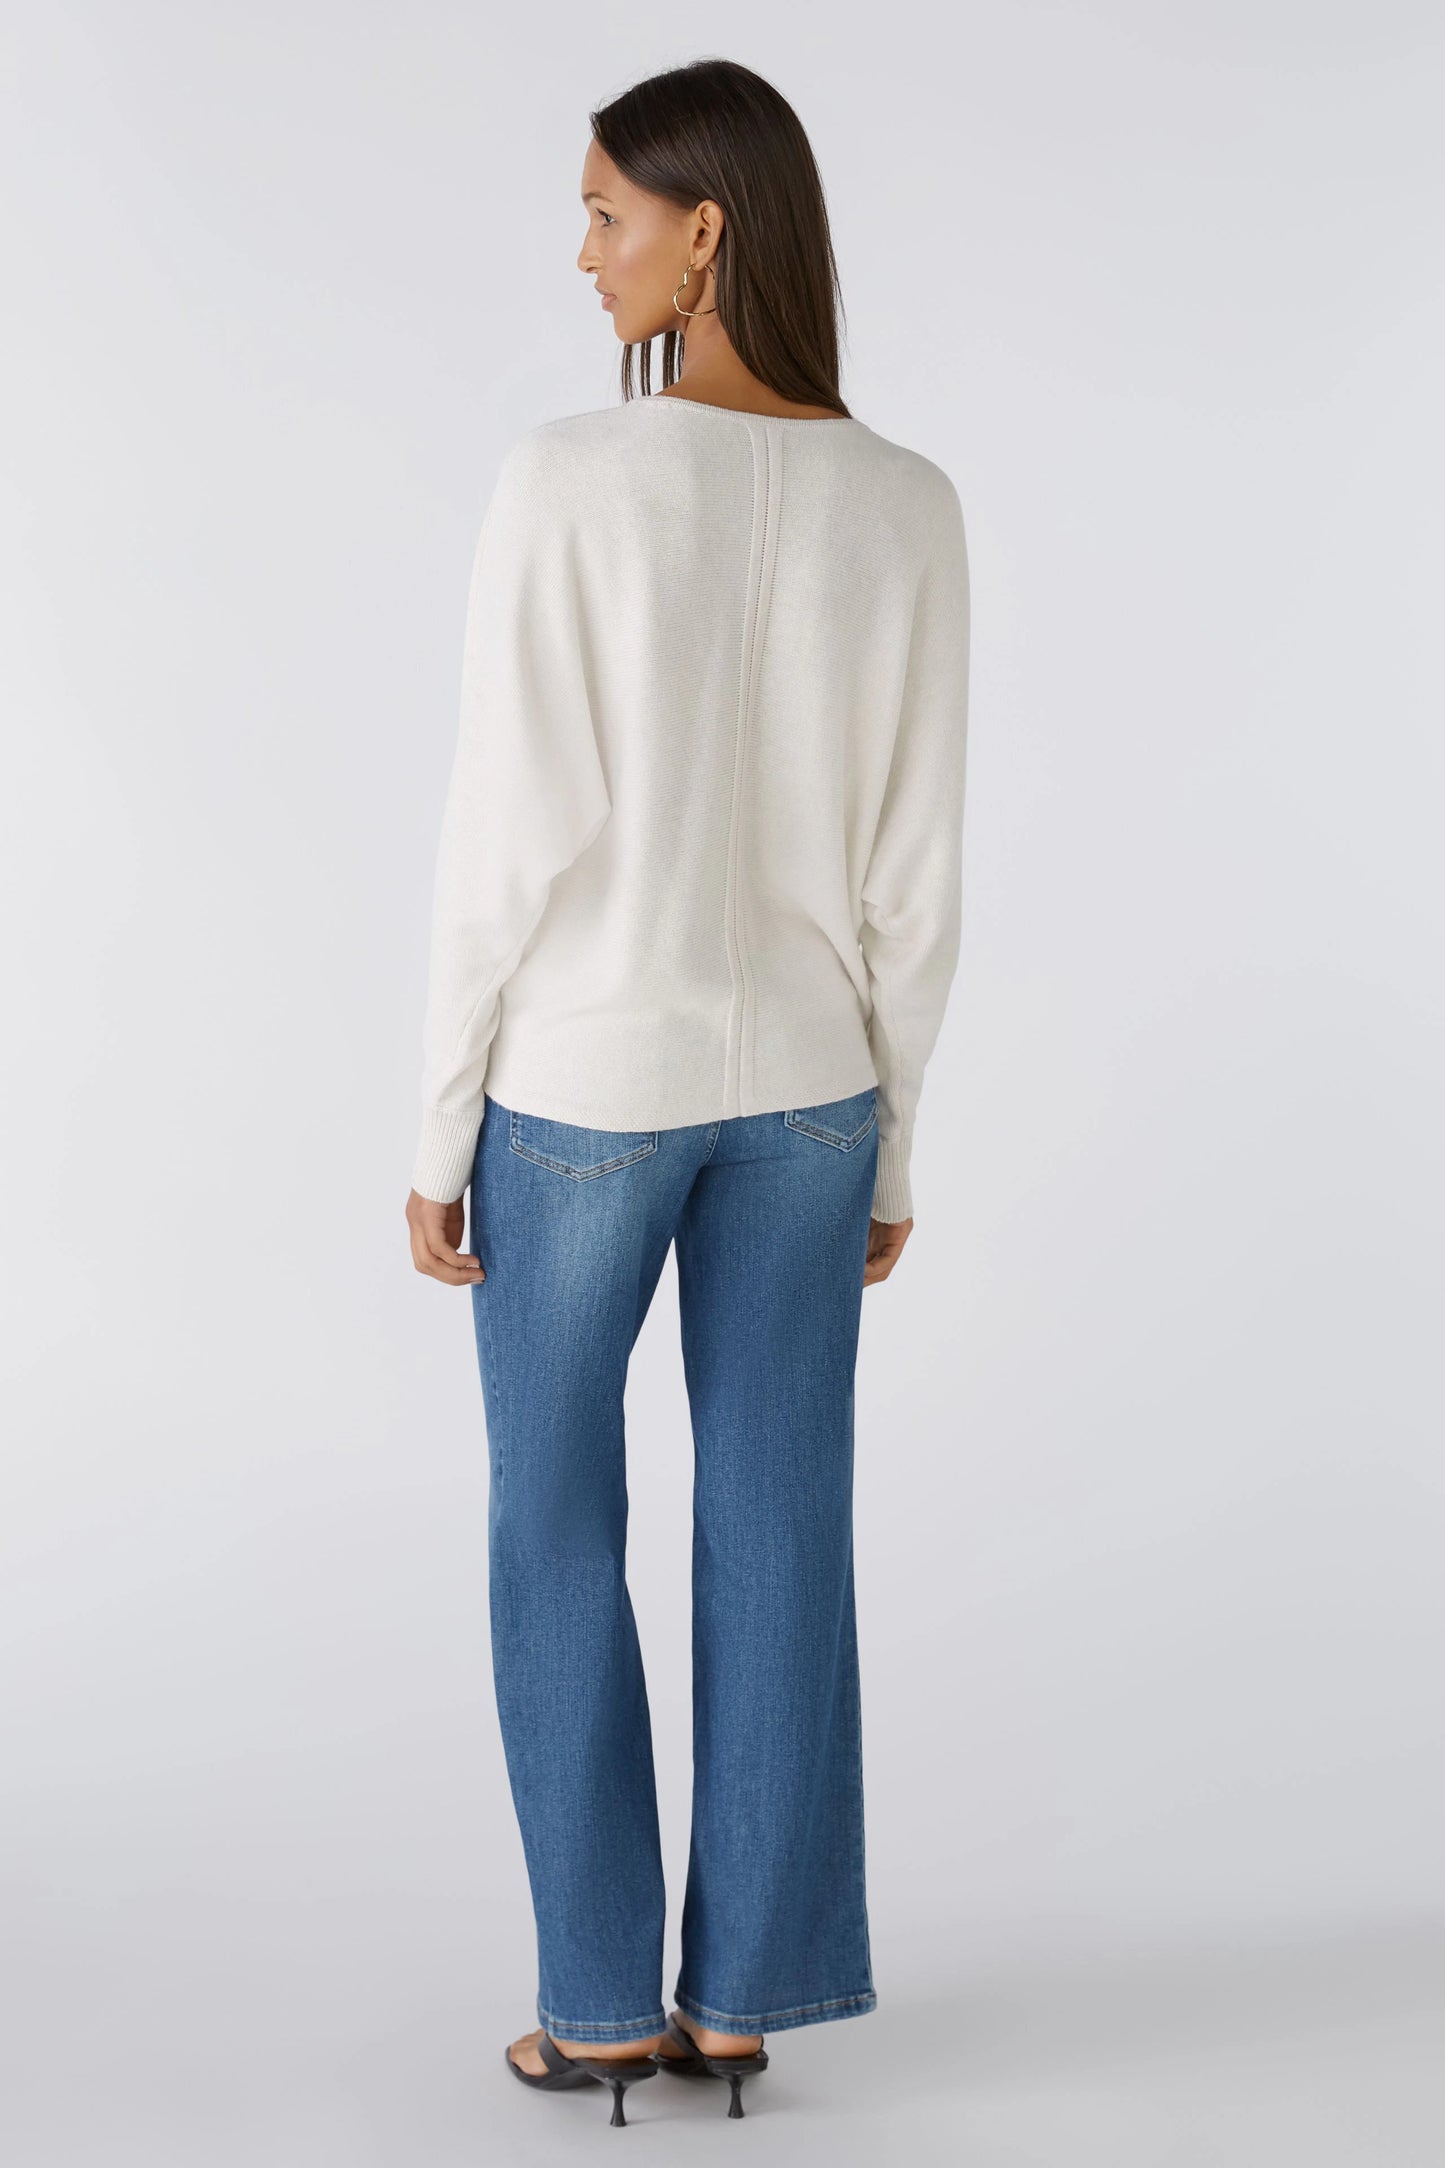 Oui Sweater with Batwing Sleeves